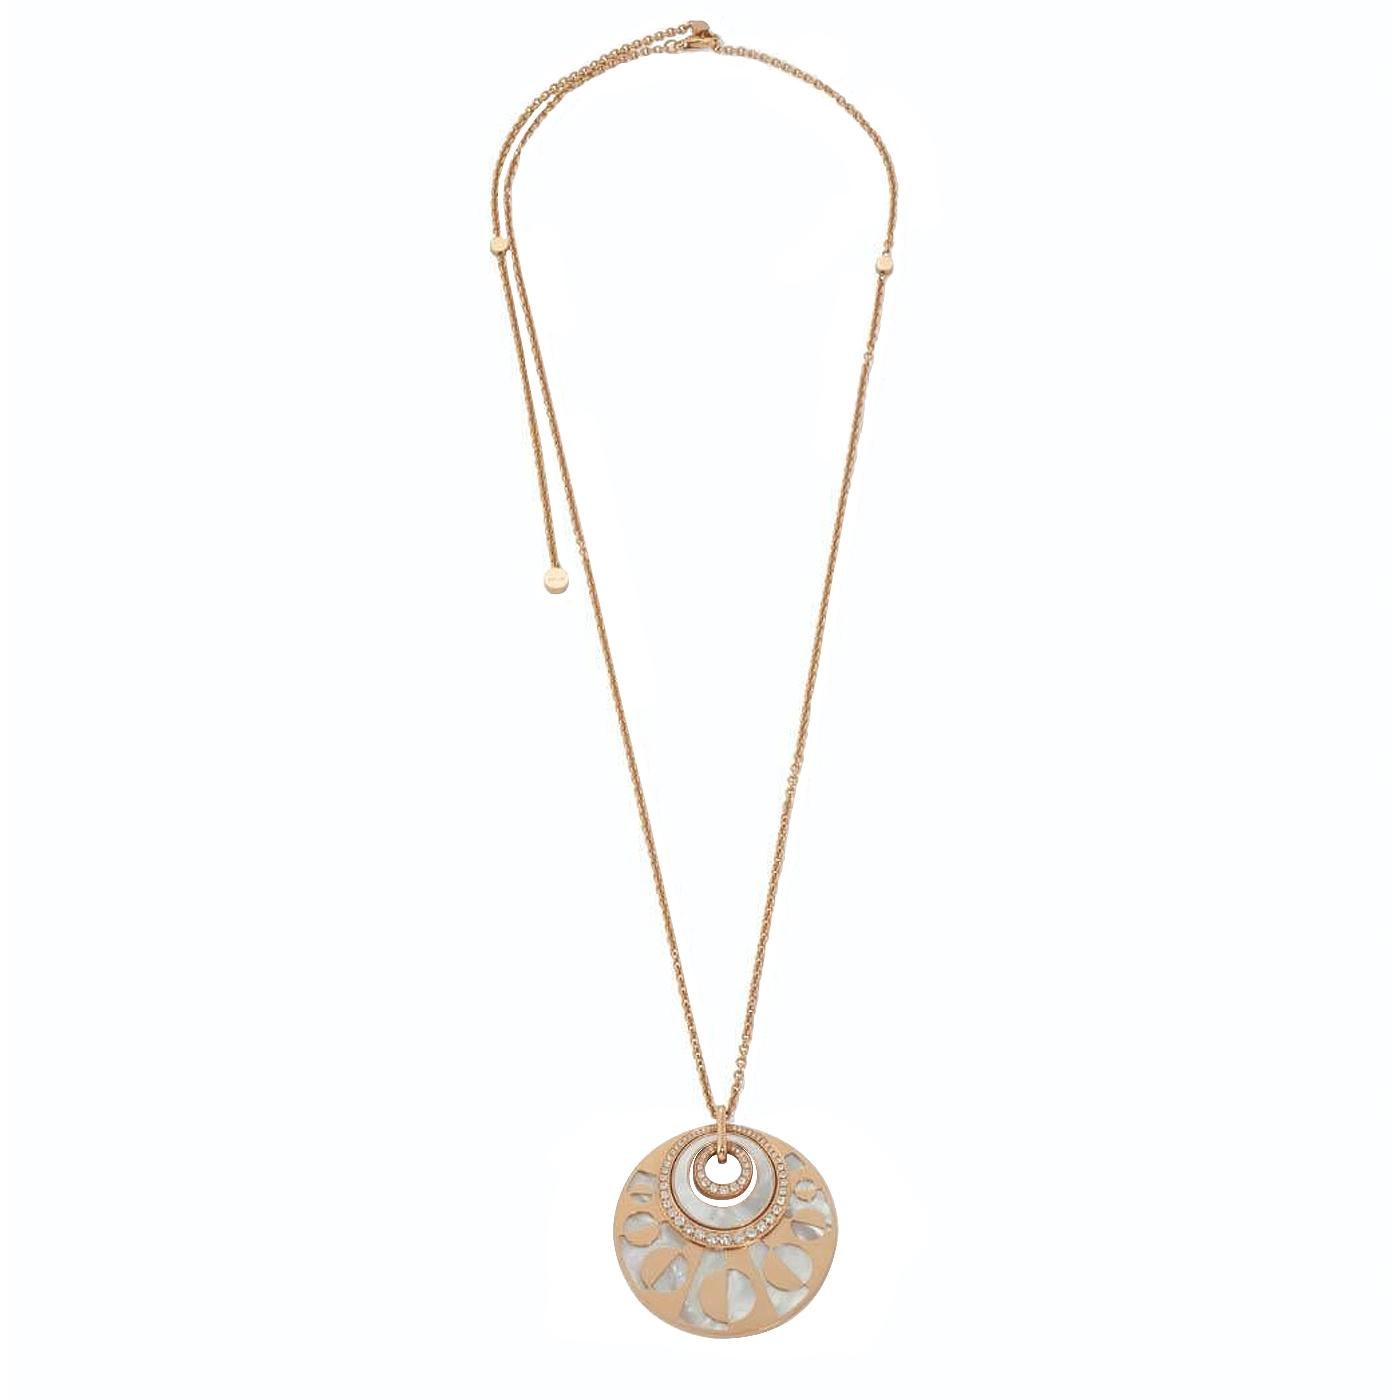 Modernist Bvlgari Intarsio Diamond and Mother of Pearl Pendant Necklace 18k Rose Gold For Sale